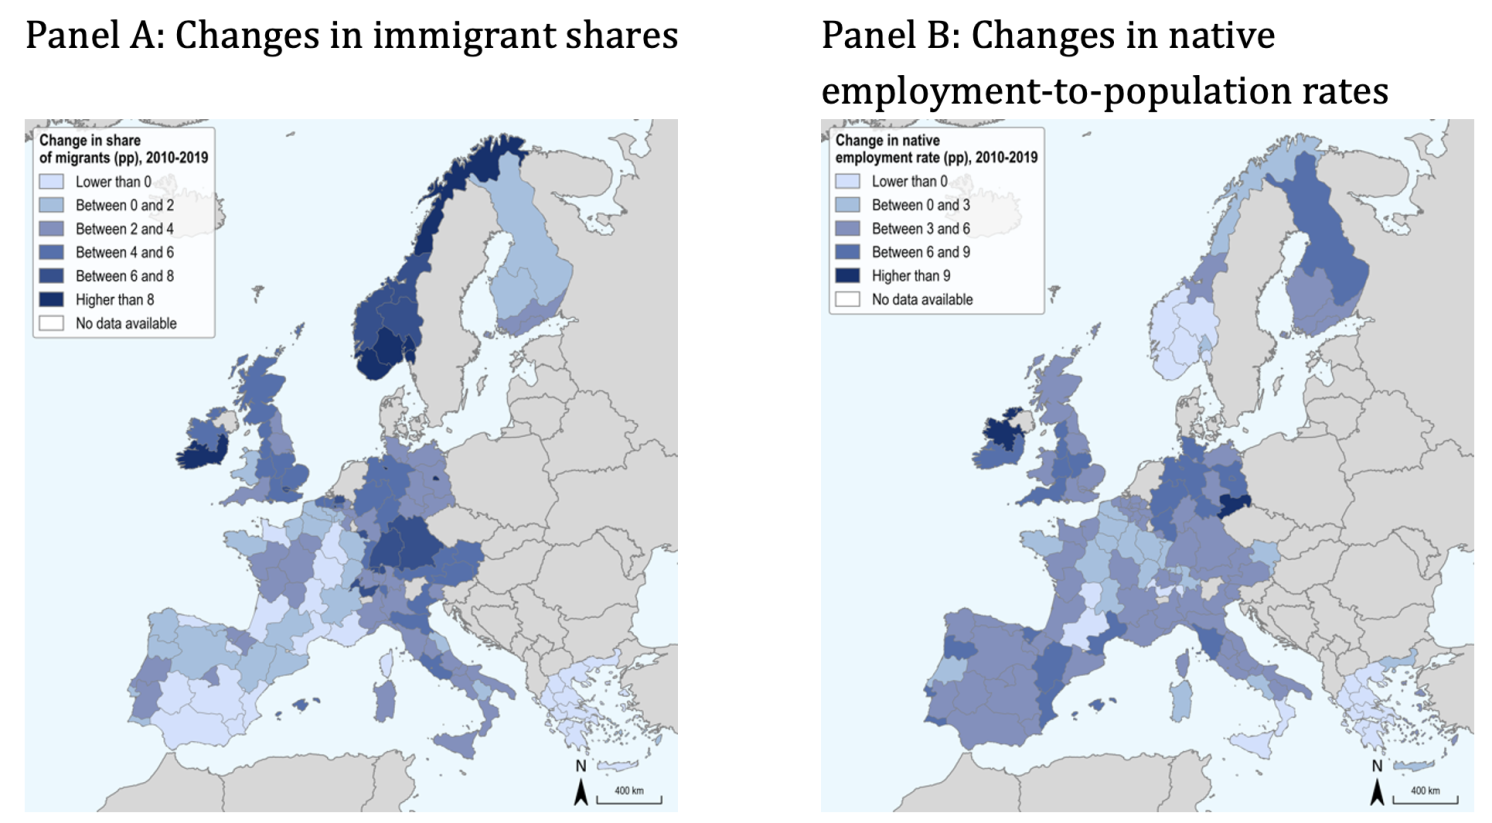 Figure 1 The changes in the employment rates and immigrant shares in 13 European countries between 2010 and 2019